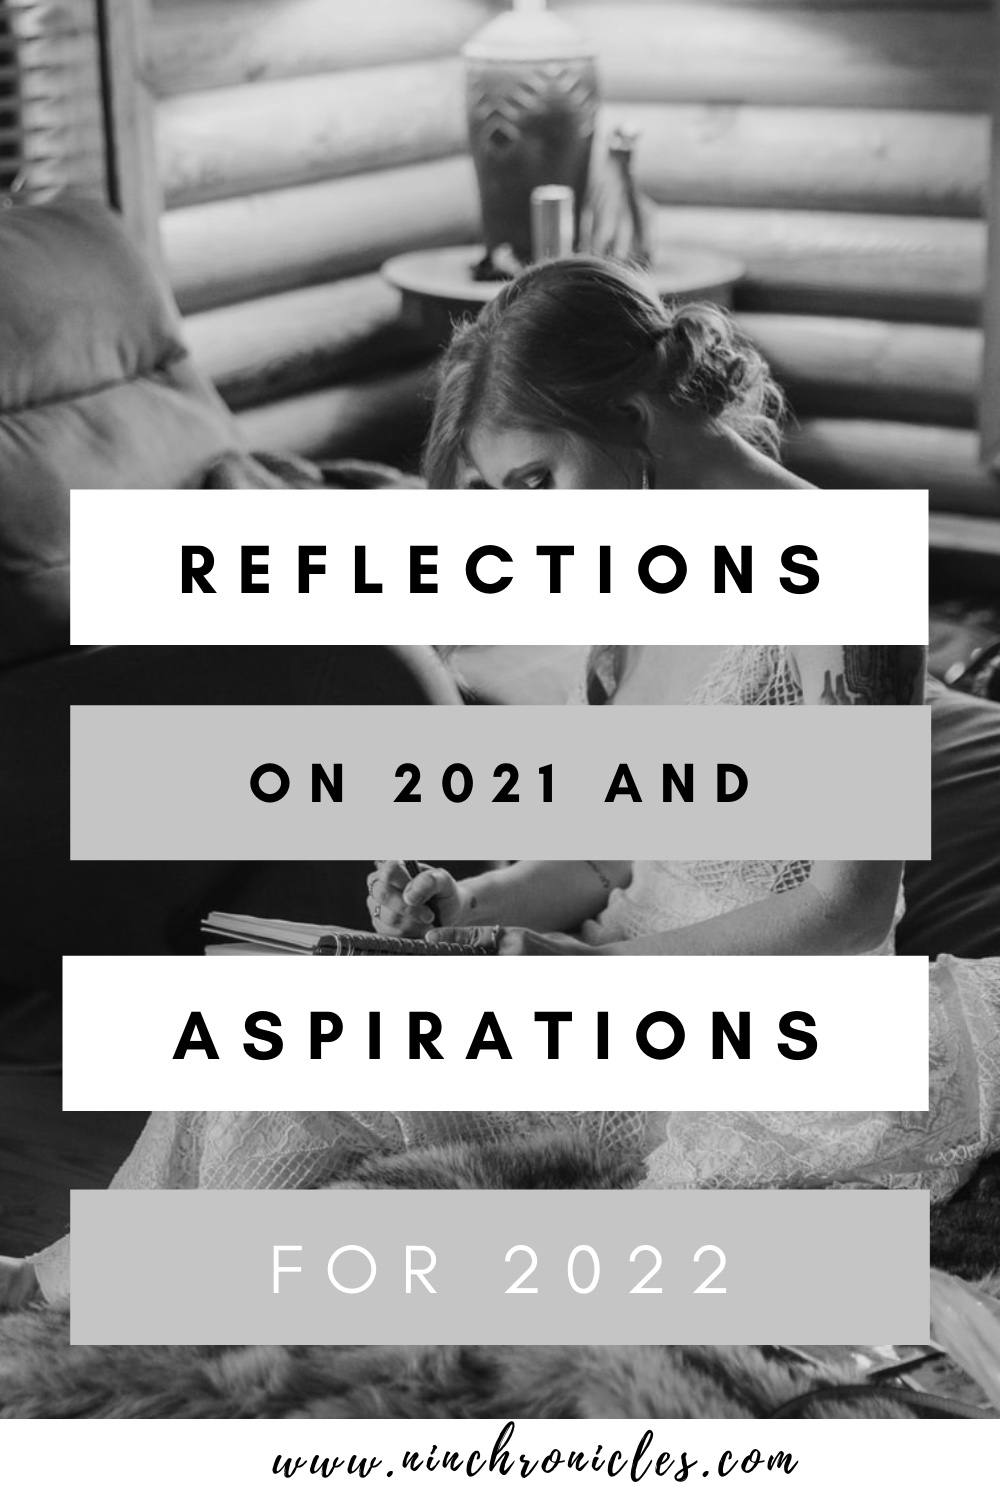 Reflections on 2021 and Aspirations for 2022